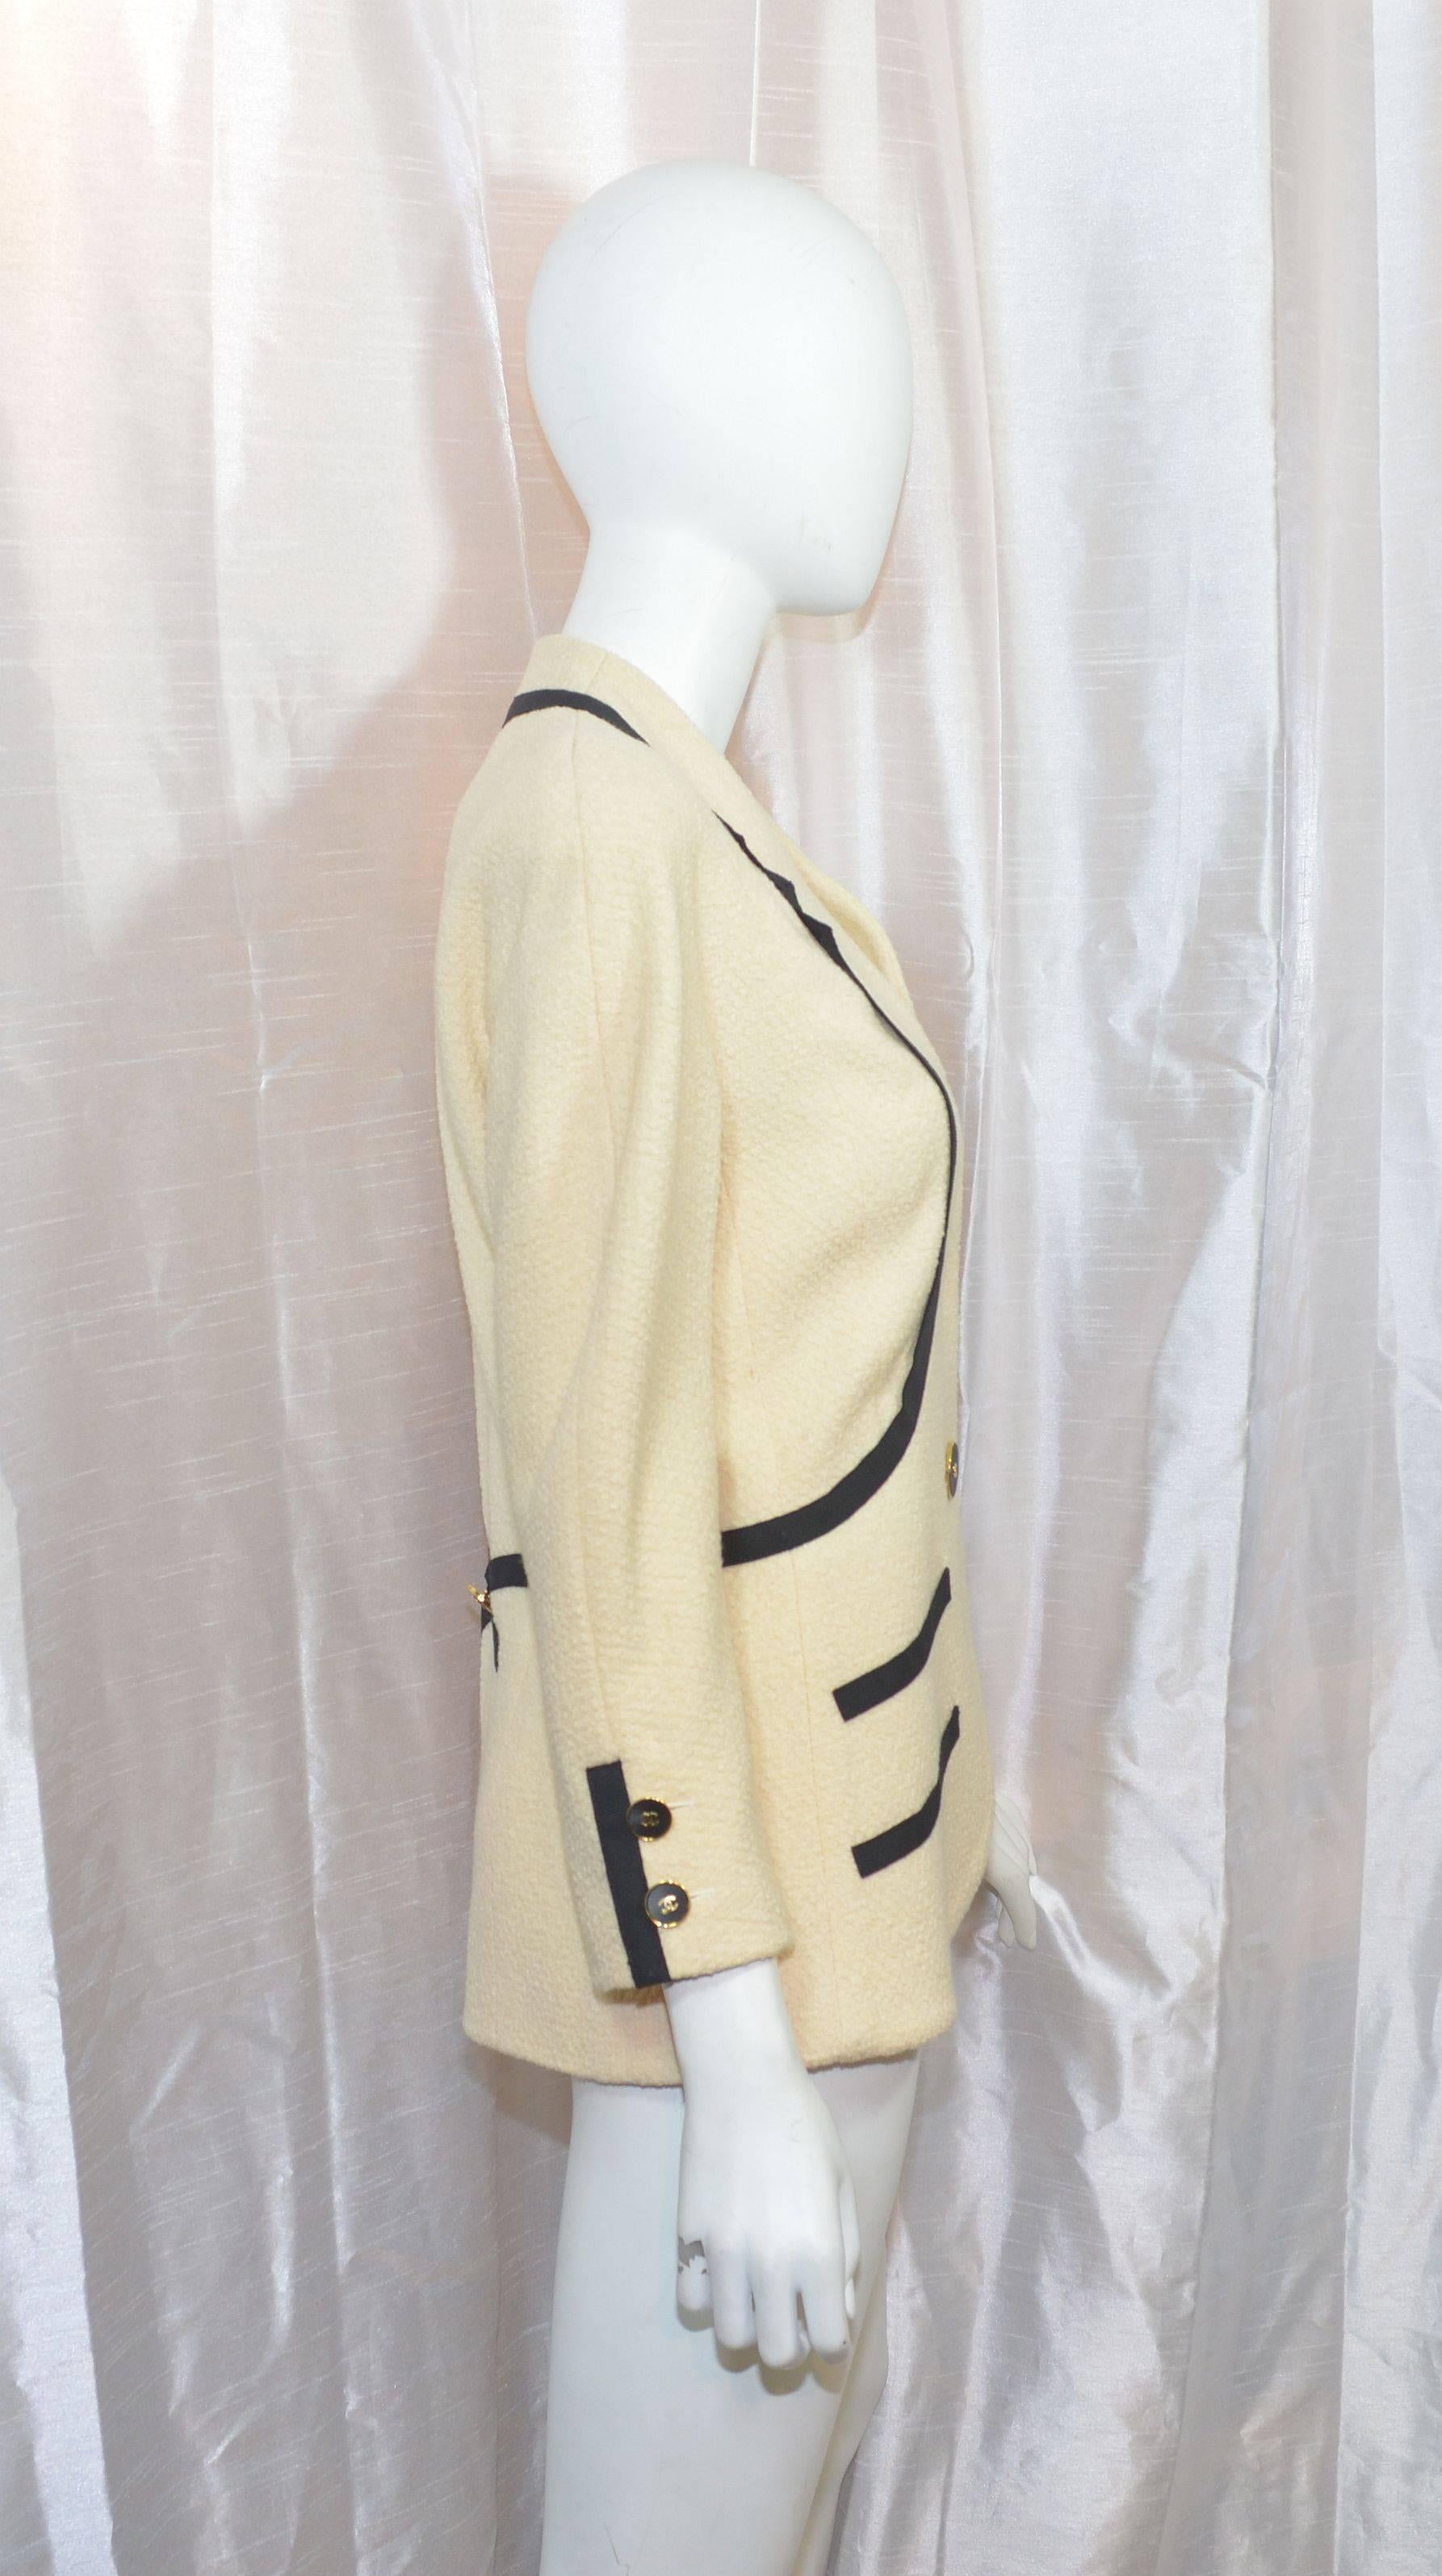 Chanel jacket from collection 25 in 1991. Featured in an ivory knit with black ribboning, one center button closure and buttons along the cuff. Ribbon detail continues to the back of the jacket with a button finish. Made with 100% wool and lined in